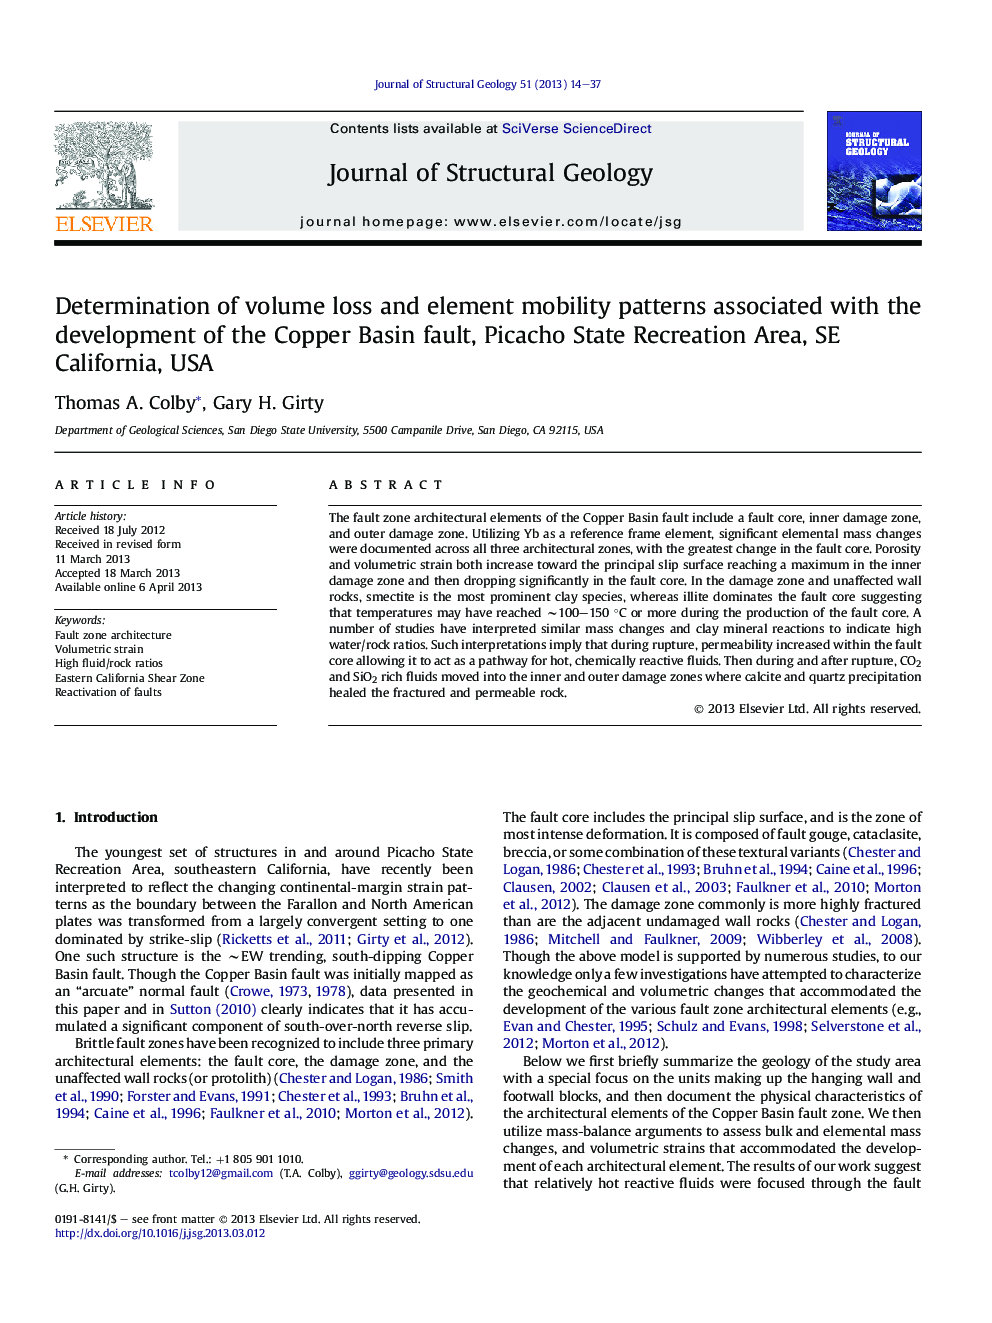 Determination of volume loss and element mobility patterns associated with the development of the Copper Basin fault, Picacho State Recreation Area, SE California, USA